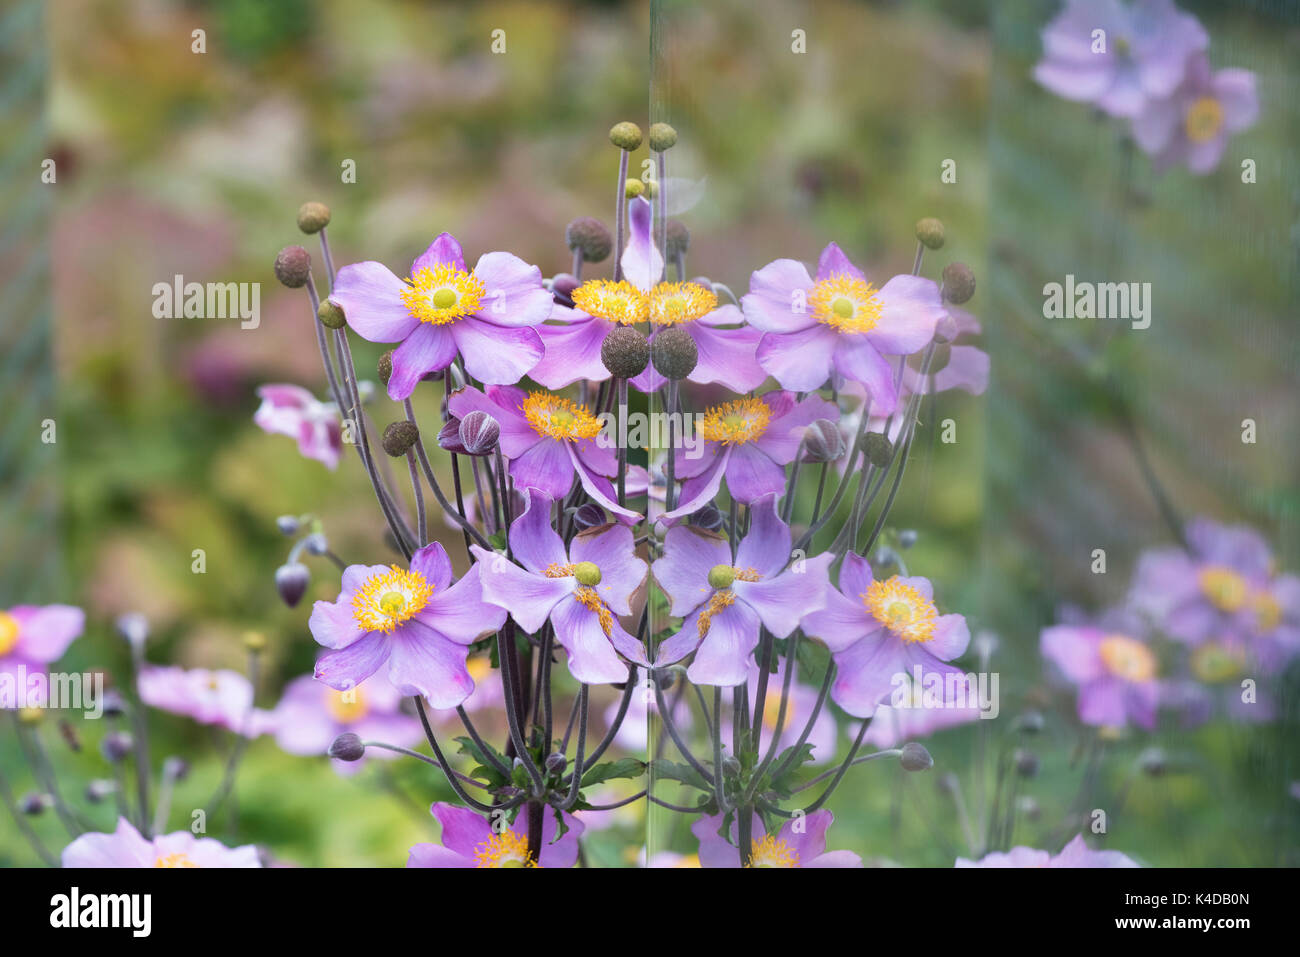 Anemone x hybrida Elegans. Japanese anemone 'Elegans' flowers and reflections in a glass panel at RHS Wisley Gardens. Surrey, England Stock Photo